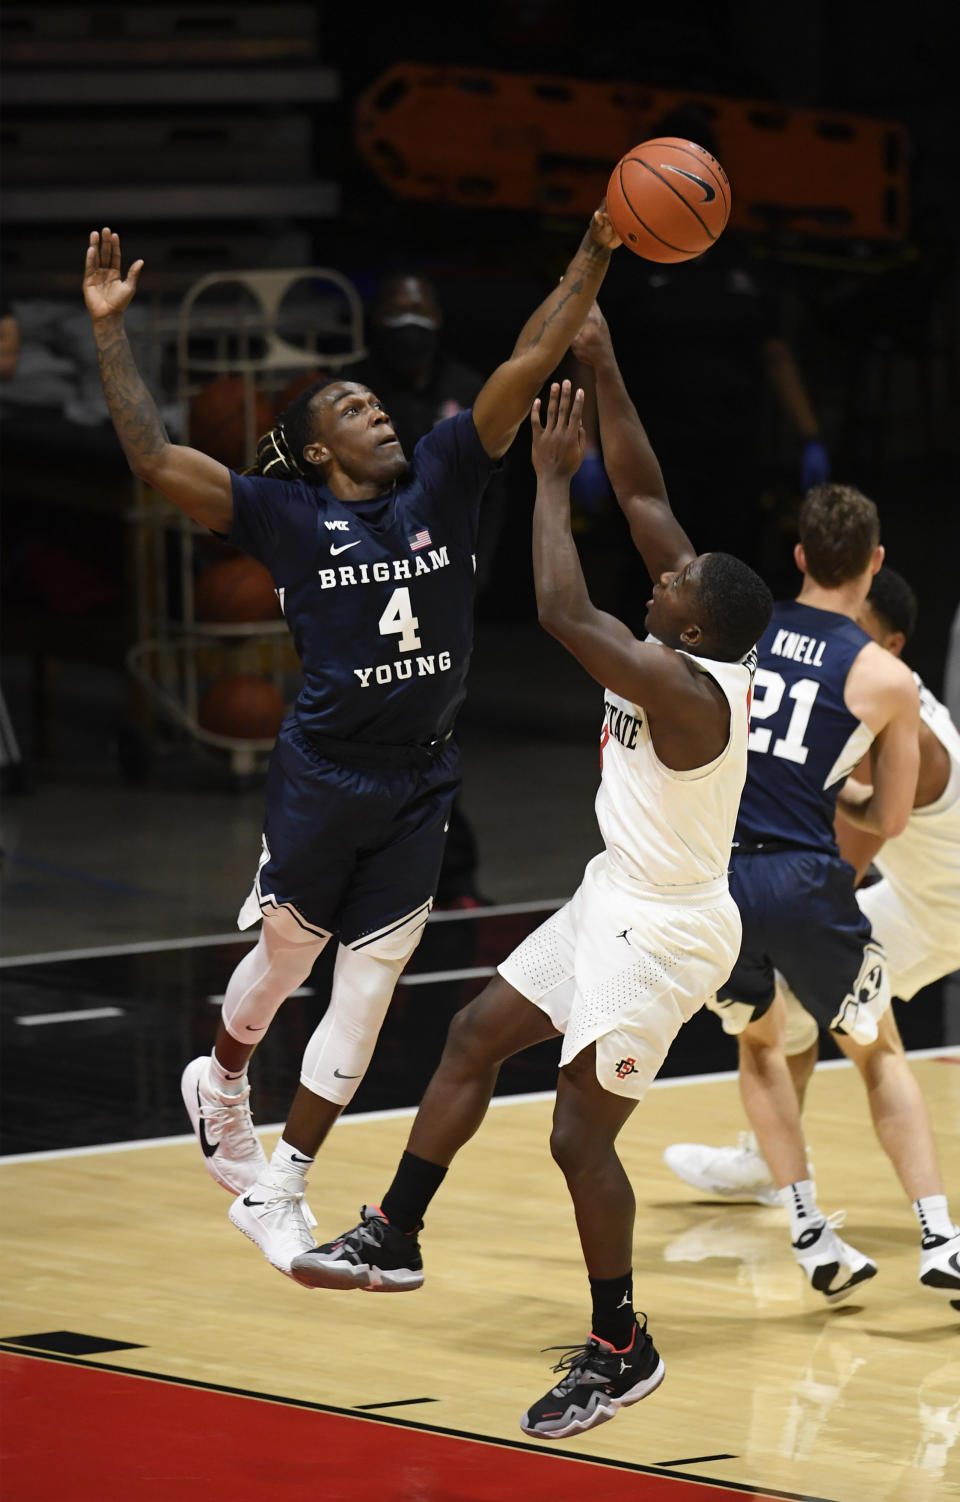 BYU guard Brandon Averette (4) blocks a shot by San Diego State guard Terrell Gomez (3) during the second half of an NCAA college basketball game Friday, Dec. 18, 2020, in San Diego. (AP Photo/Denis Poroy)